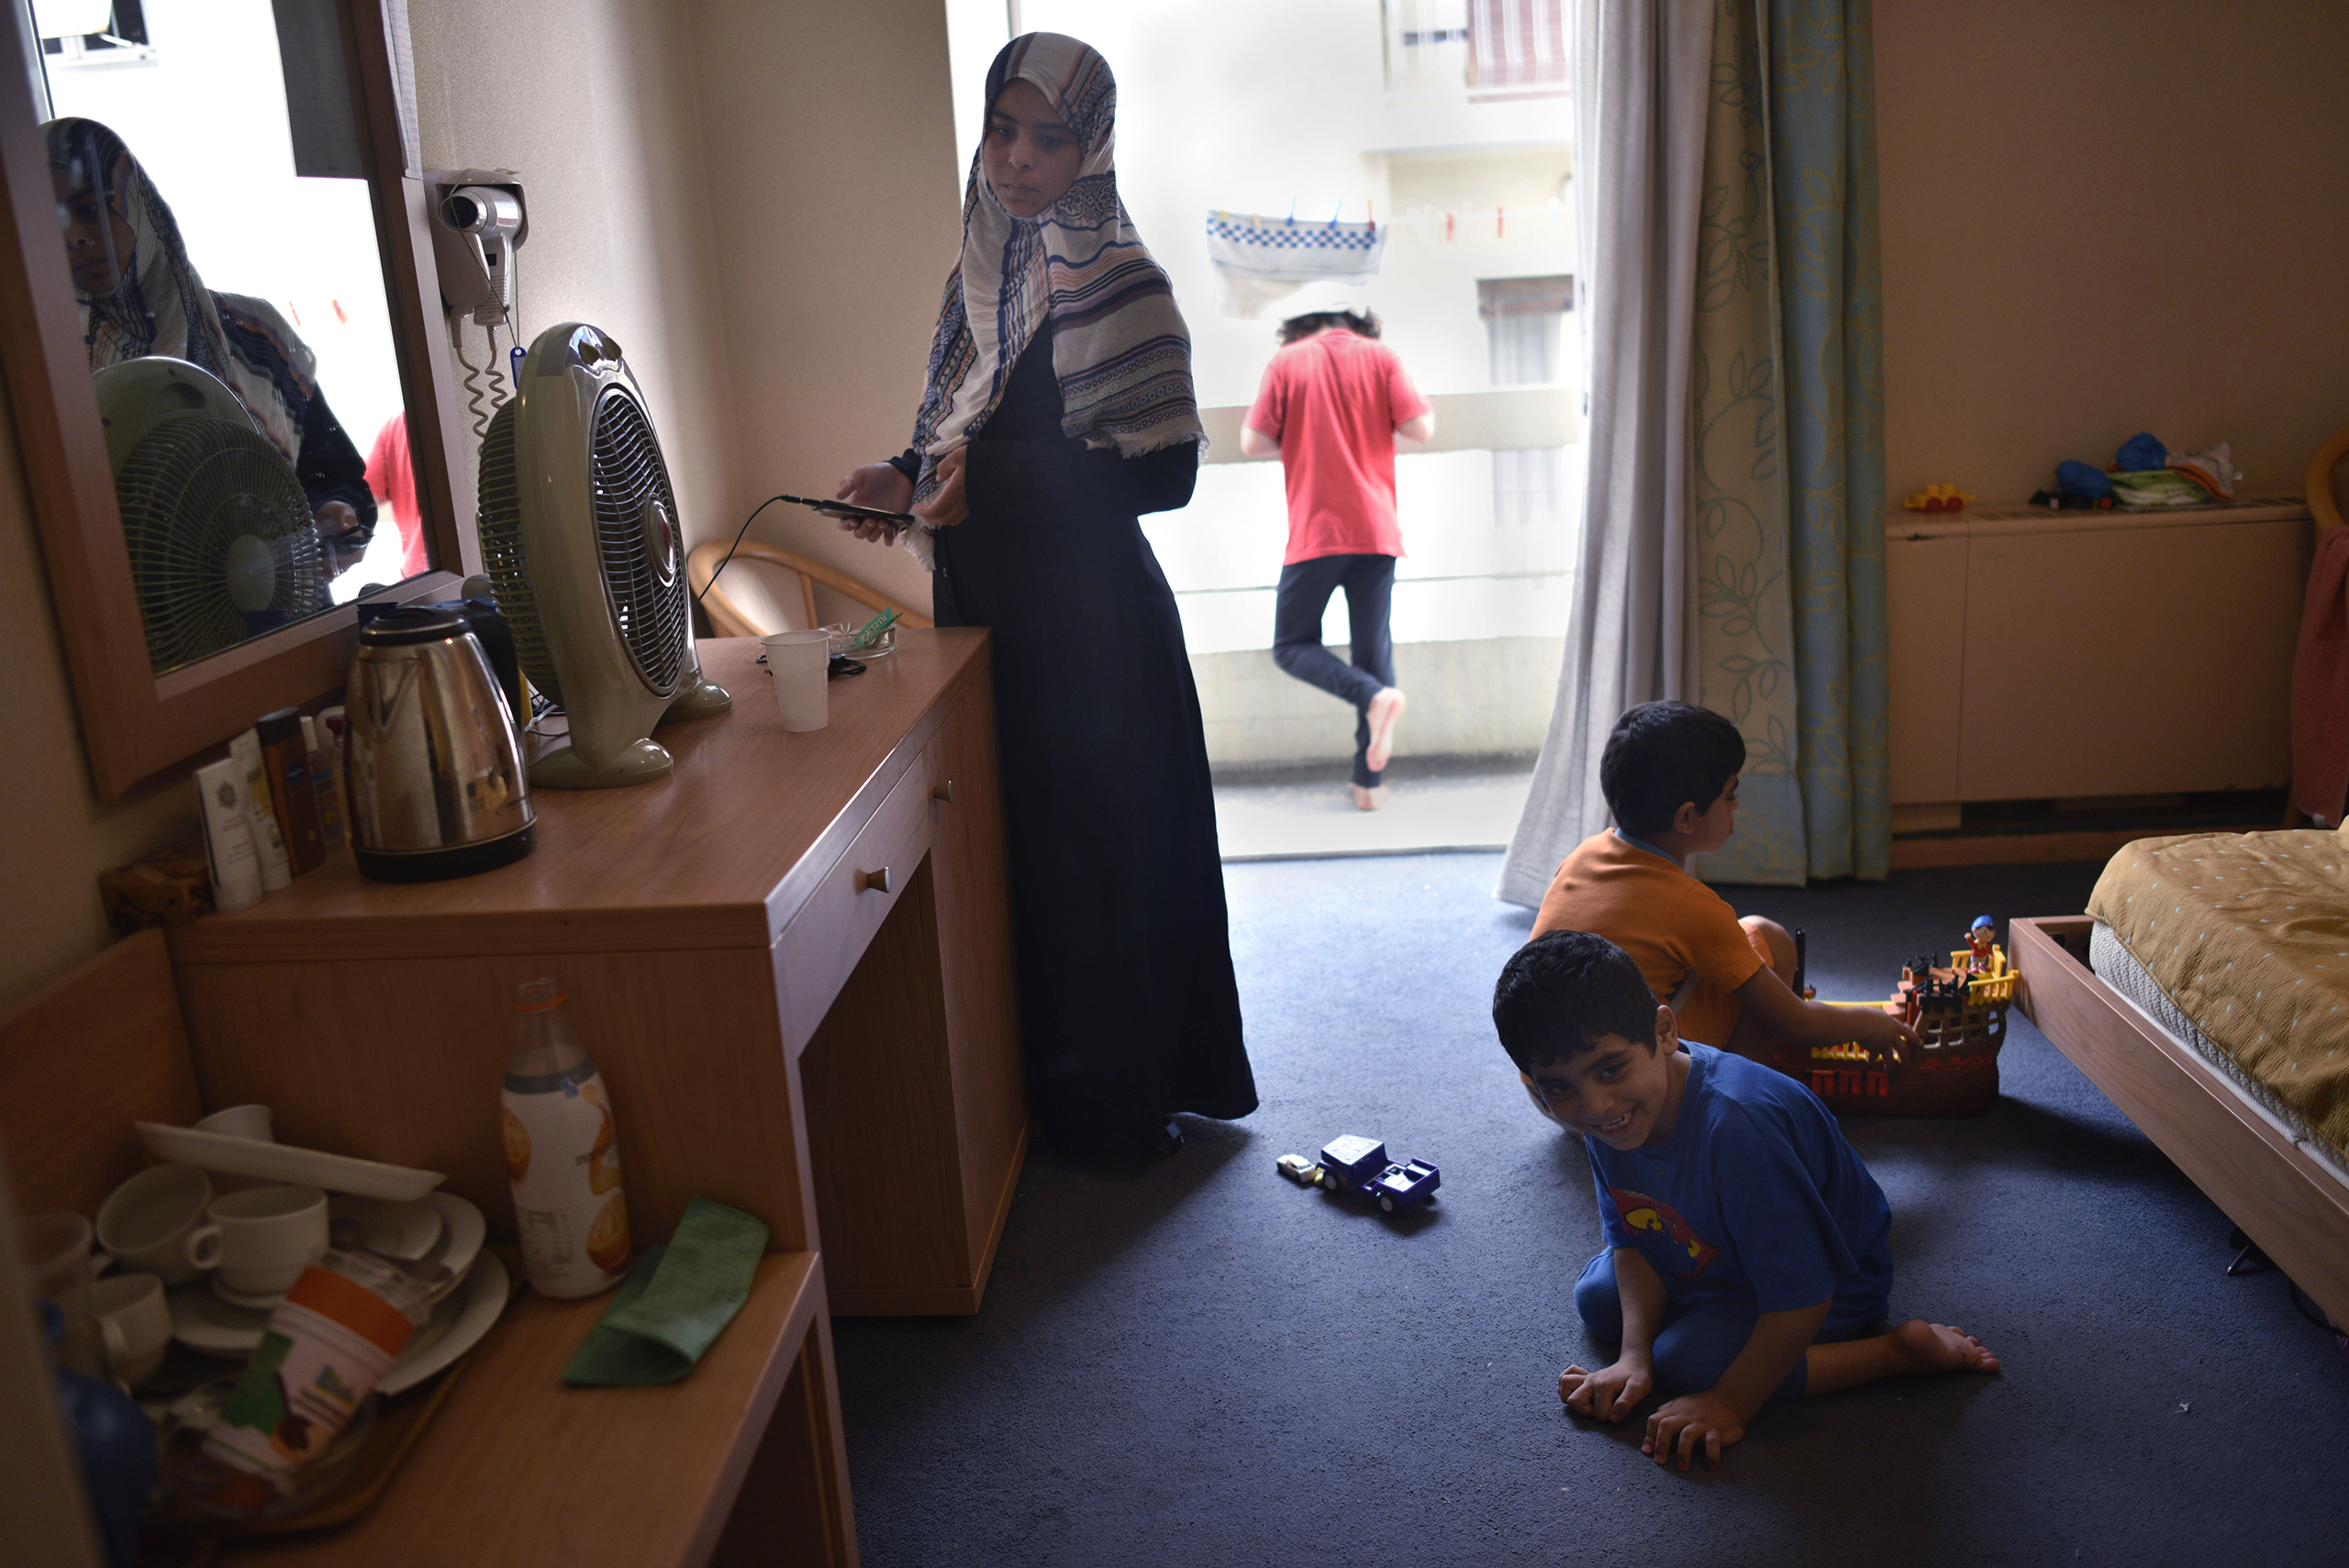 Baida, 27, from Raqqa, Syria, keeps an eye on her three children as they play in her family’s room at the hotel. Her youngest son, 7-year-old Ahmed, has cerebral palsy and cannot walk. He has a wheelchair, but because the elevators are not working in the eight-floor building, the family keeps the wheelchair downstairs in the lobby. (Lynsey Addario—Getty Images Reportage for TIME)